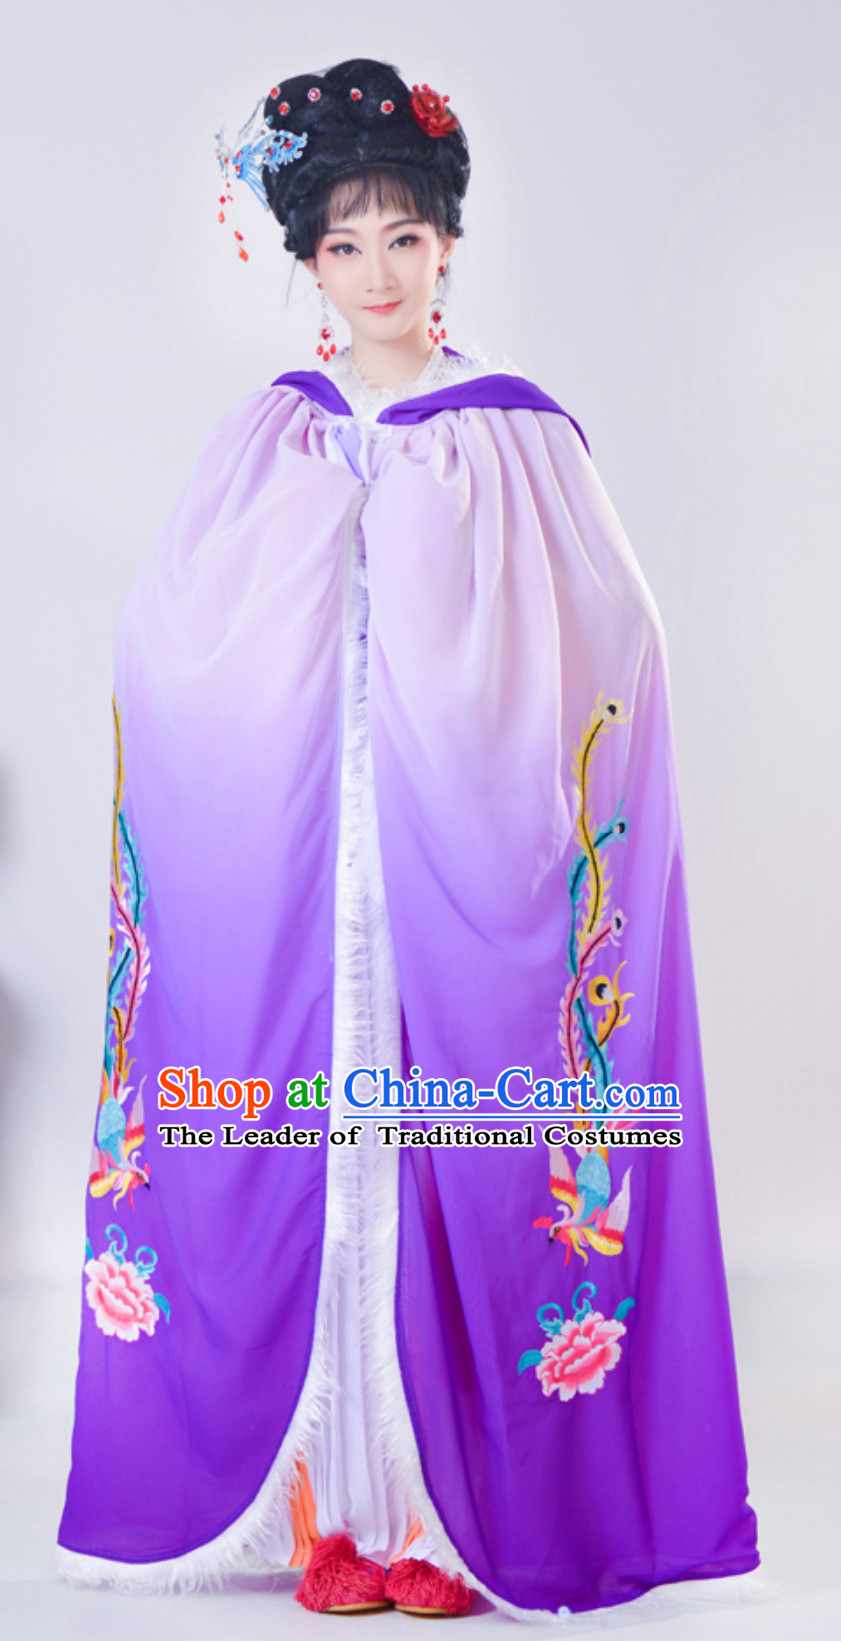 Ancient Chinese Style Mantle Kimono Costume Ancient Embroidered Phoenix Color Changing Fancy Dress Complete Set